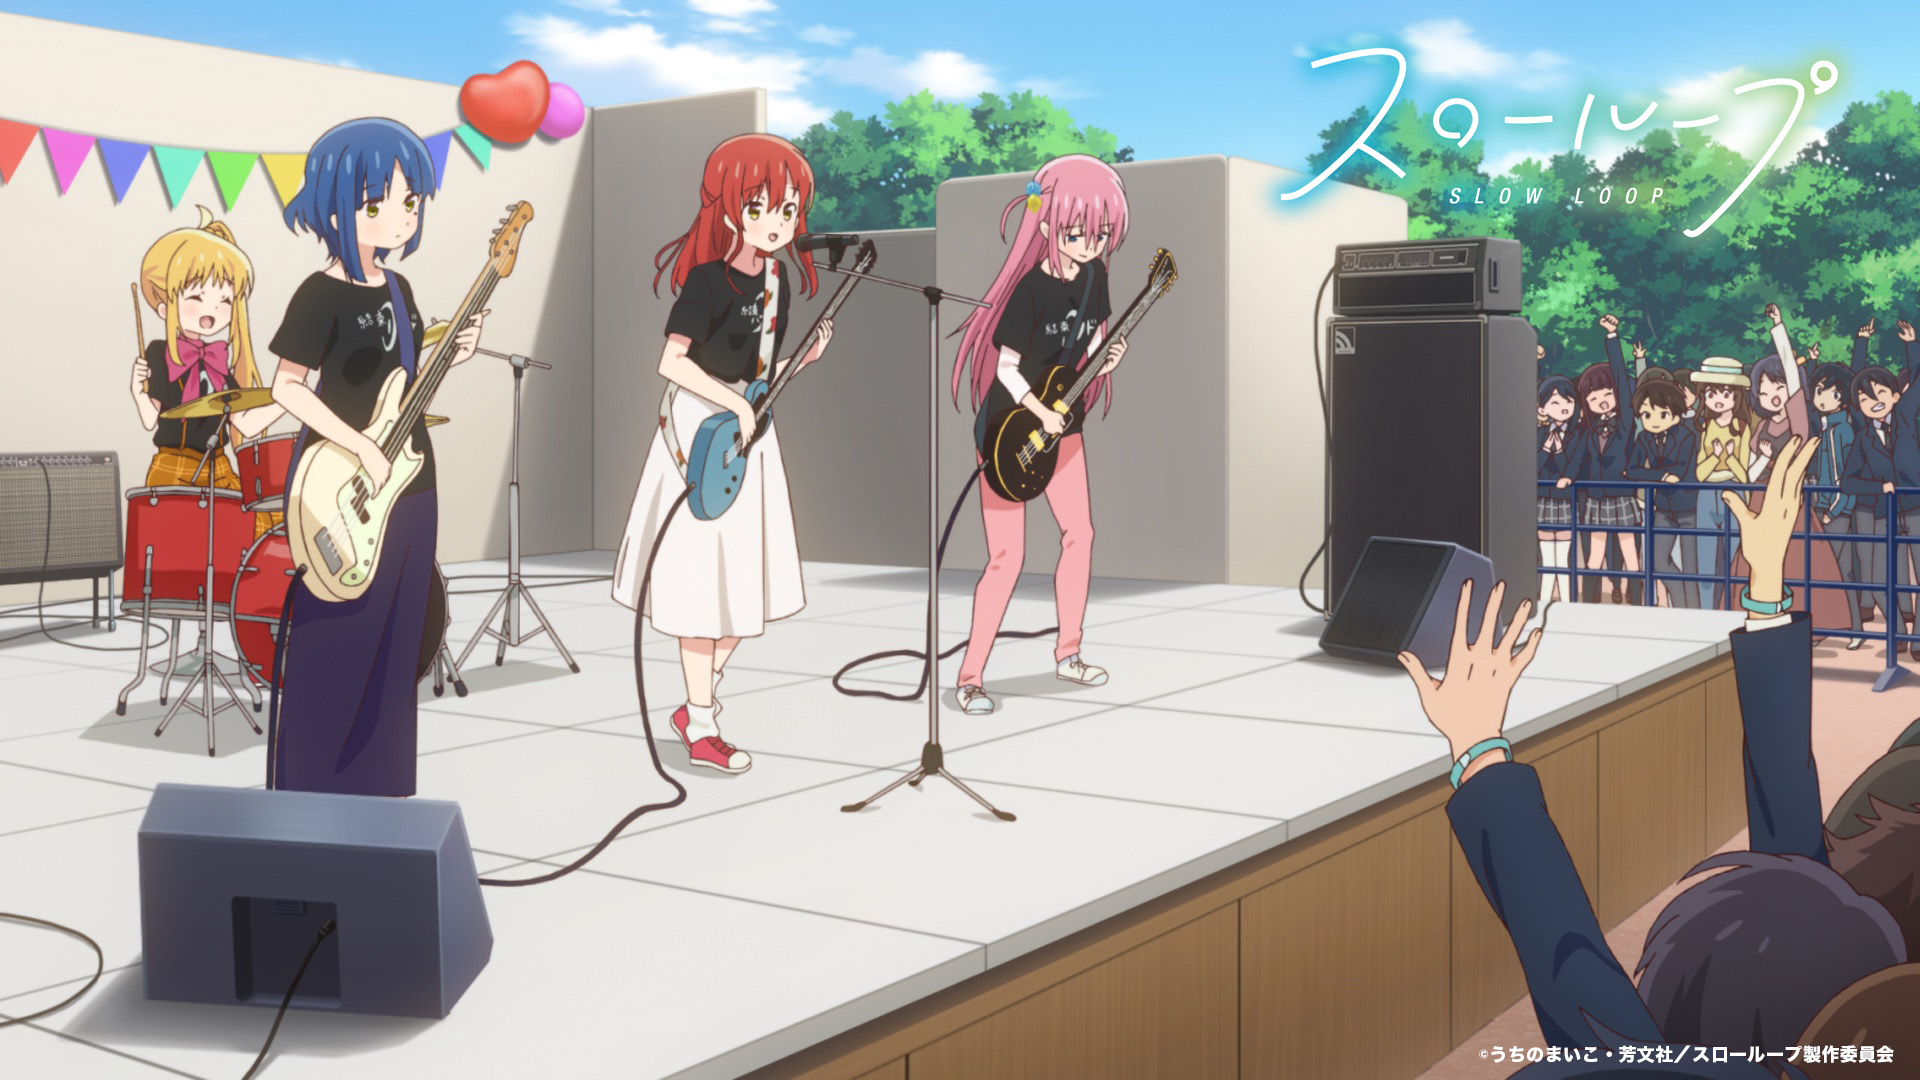 Kessoku band stage performance in the anime Slow loop